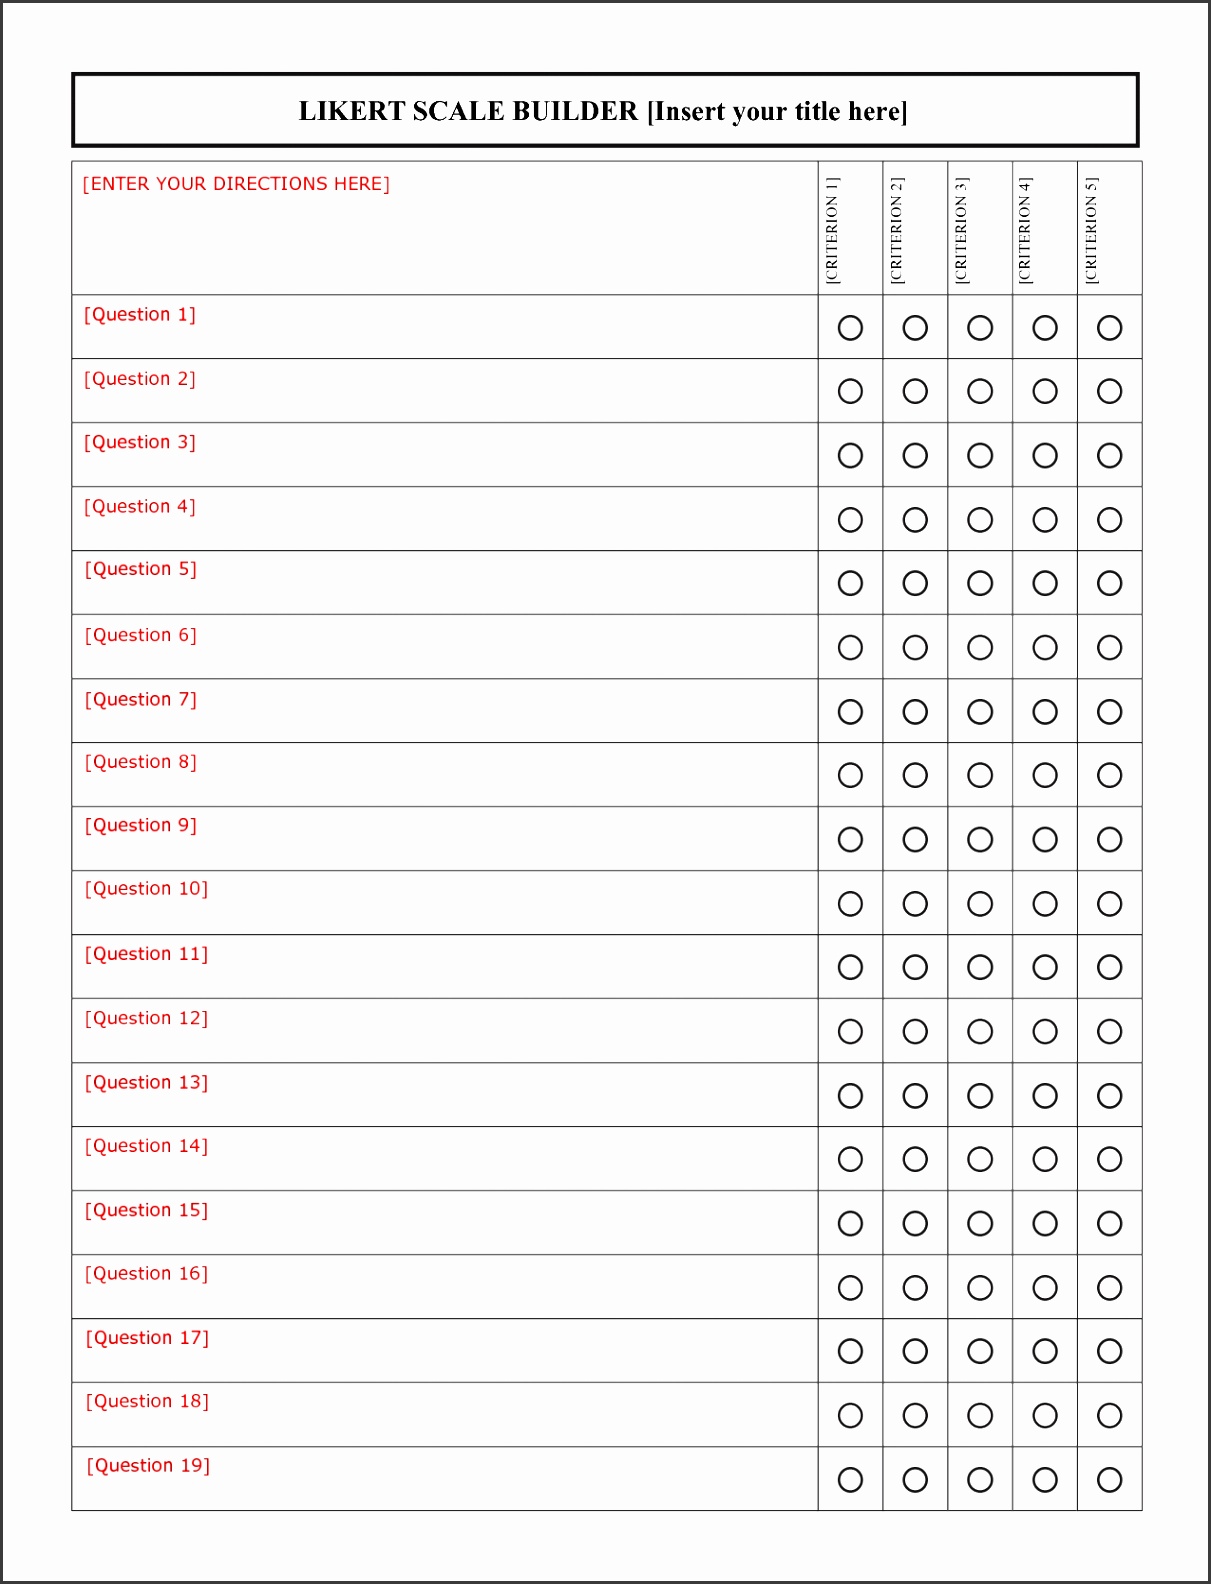 likert scale template 7693